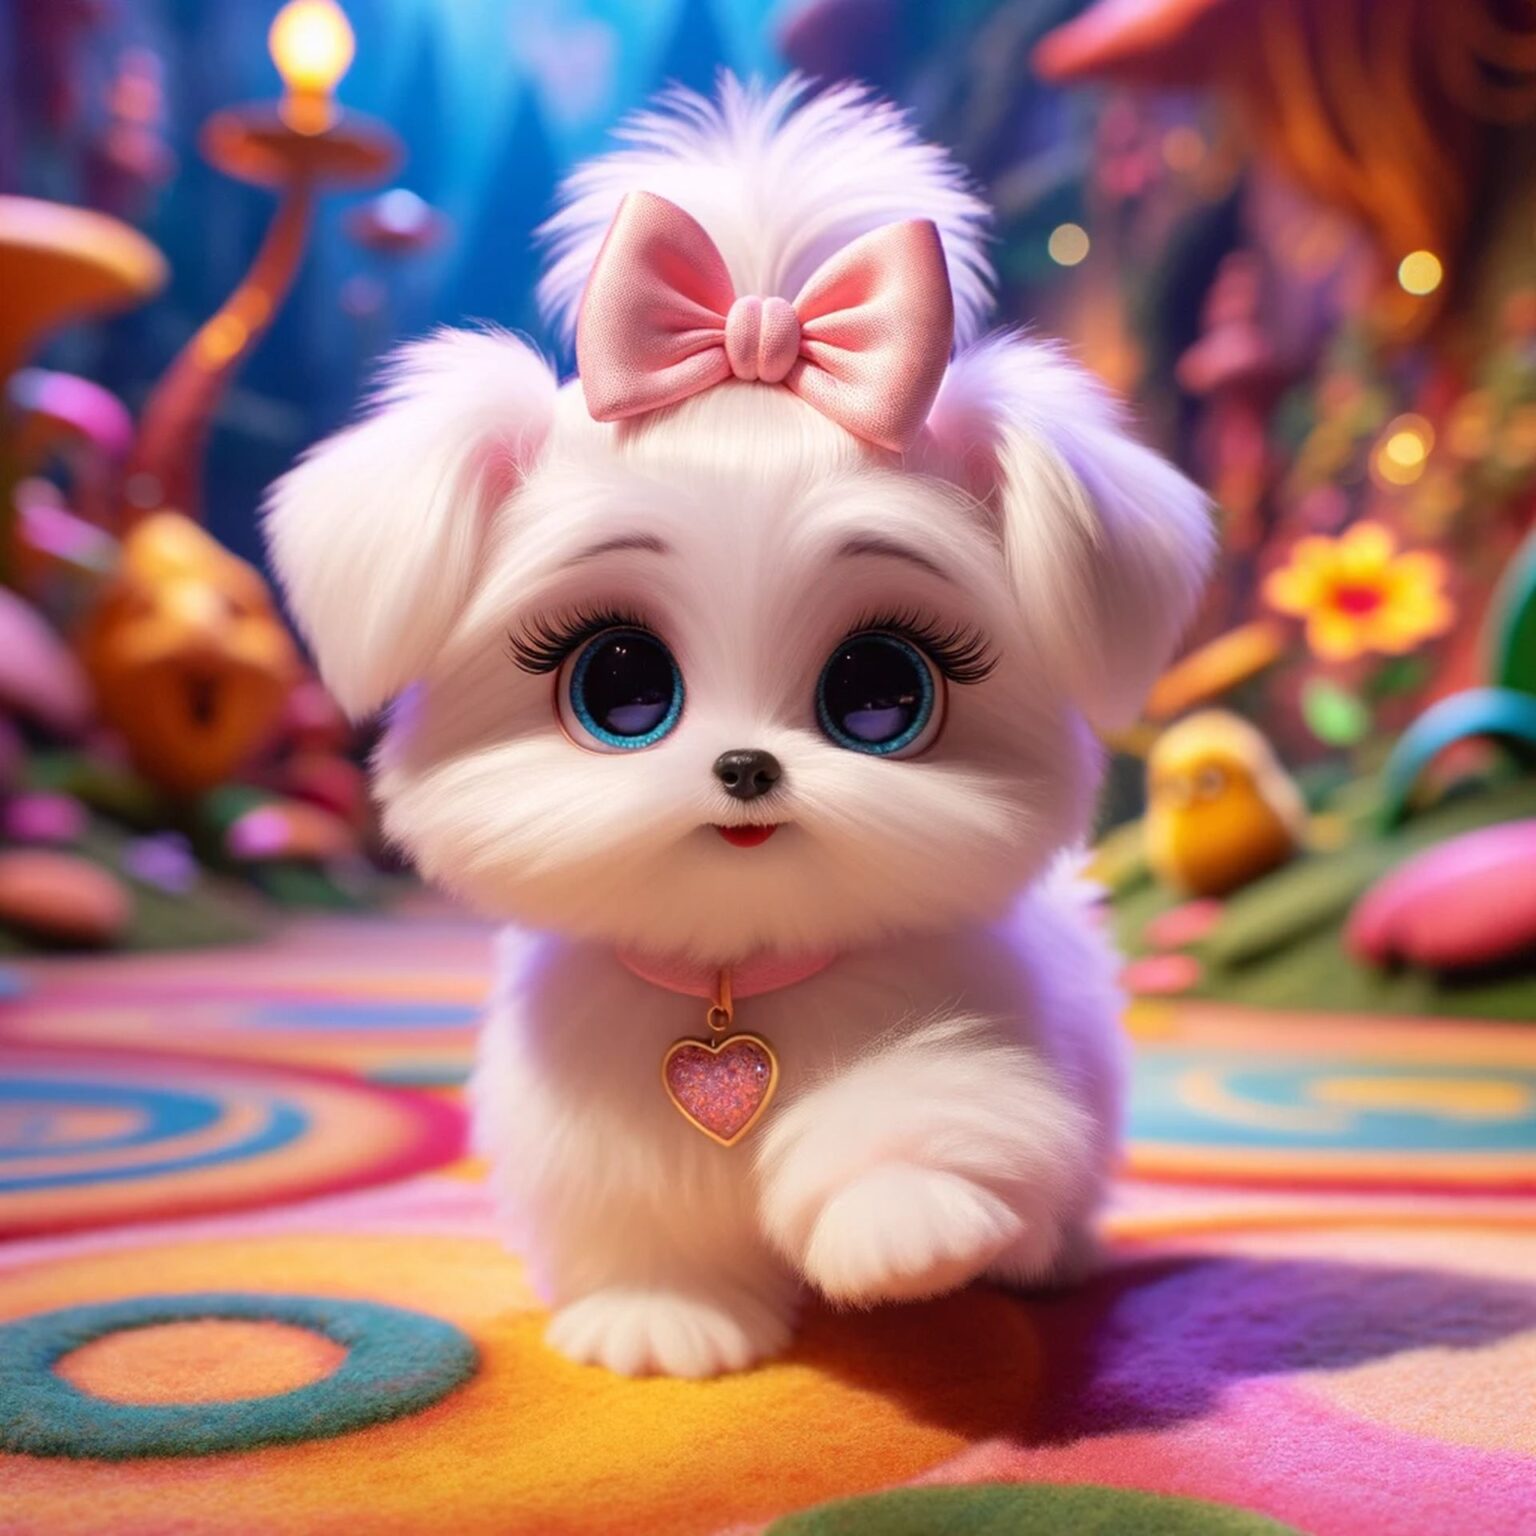 The Pixar AI Pet Poster Trend is Cuteness Overload